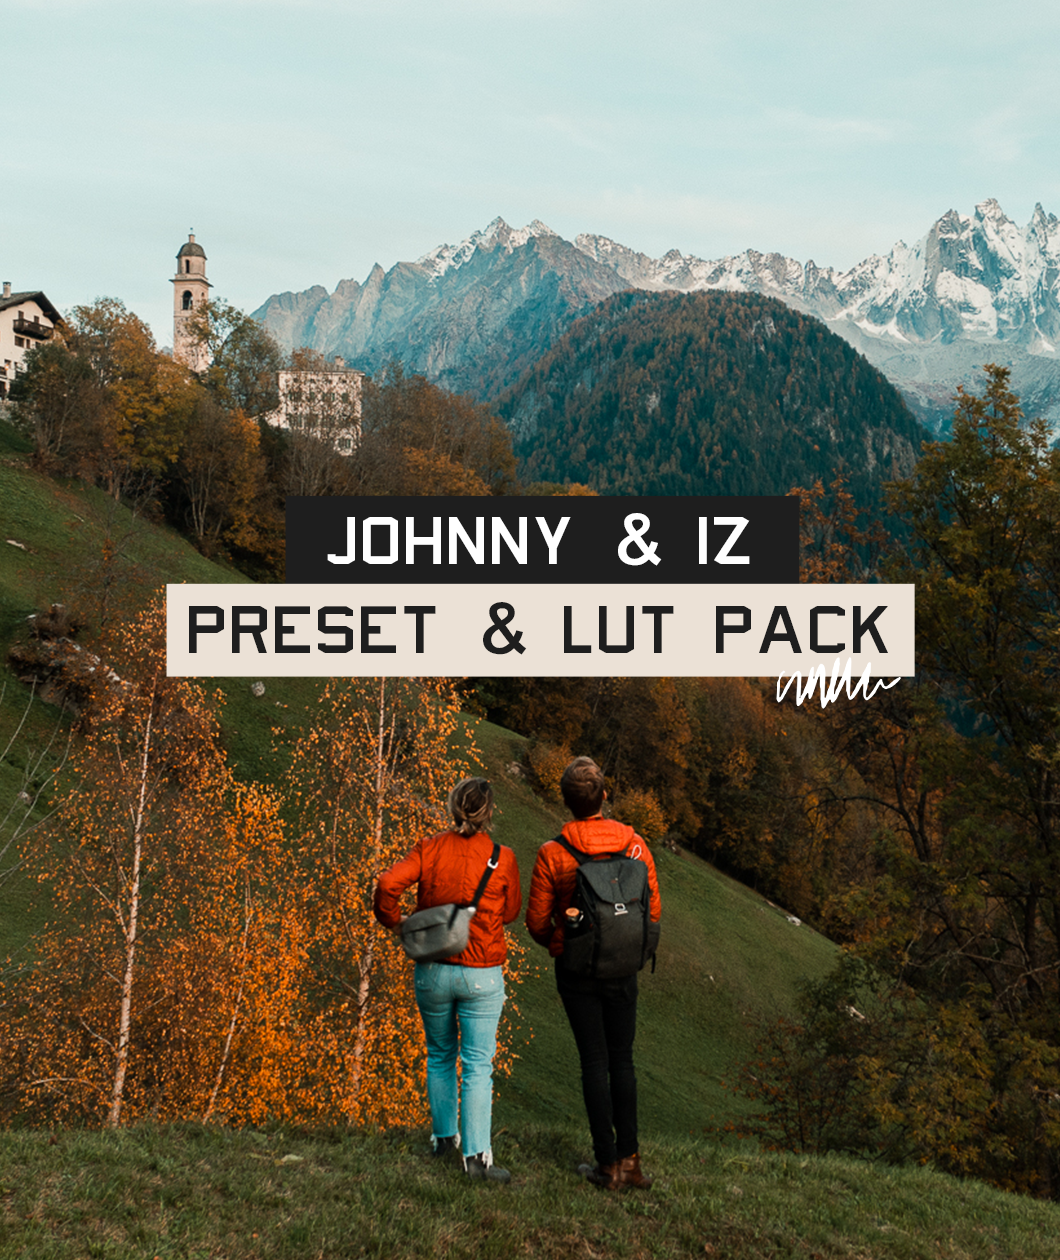 A photo of two people in orange jackets facing a mountain view. The text 